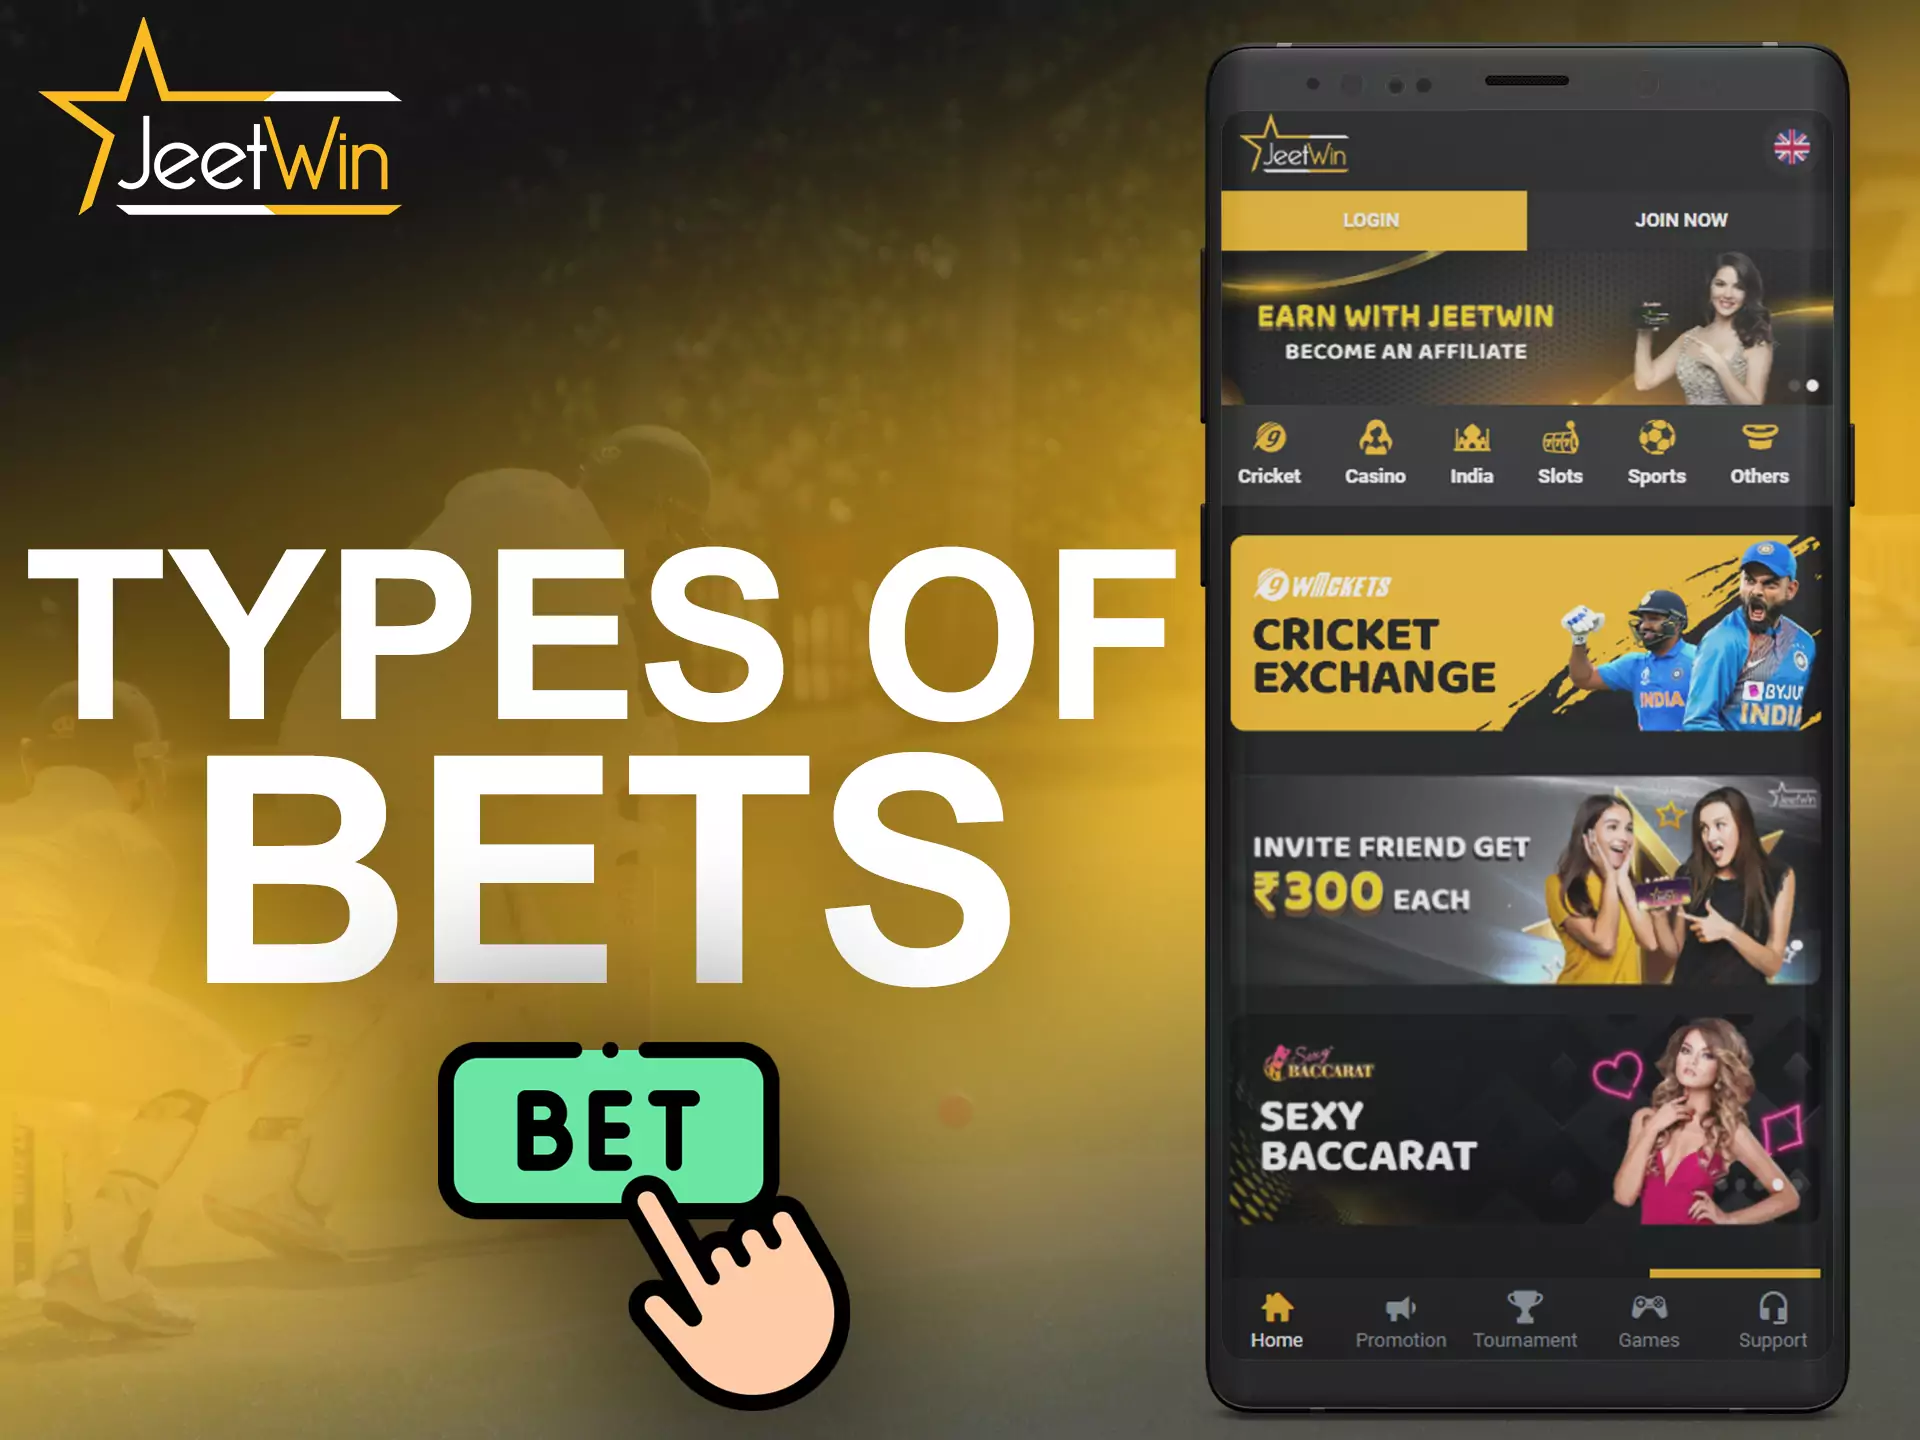 Find out about the different types of bets in JeetWin, choose the most convenient for you.